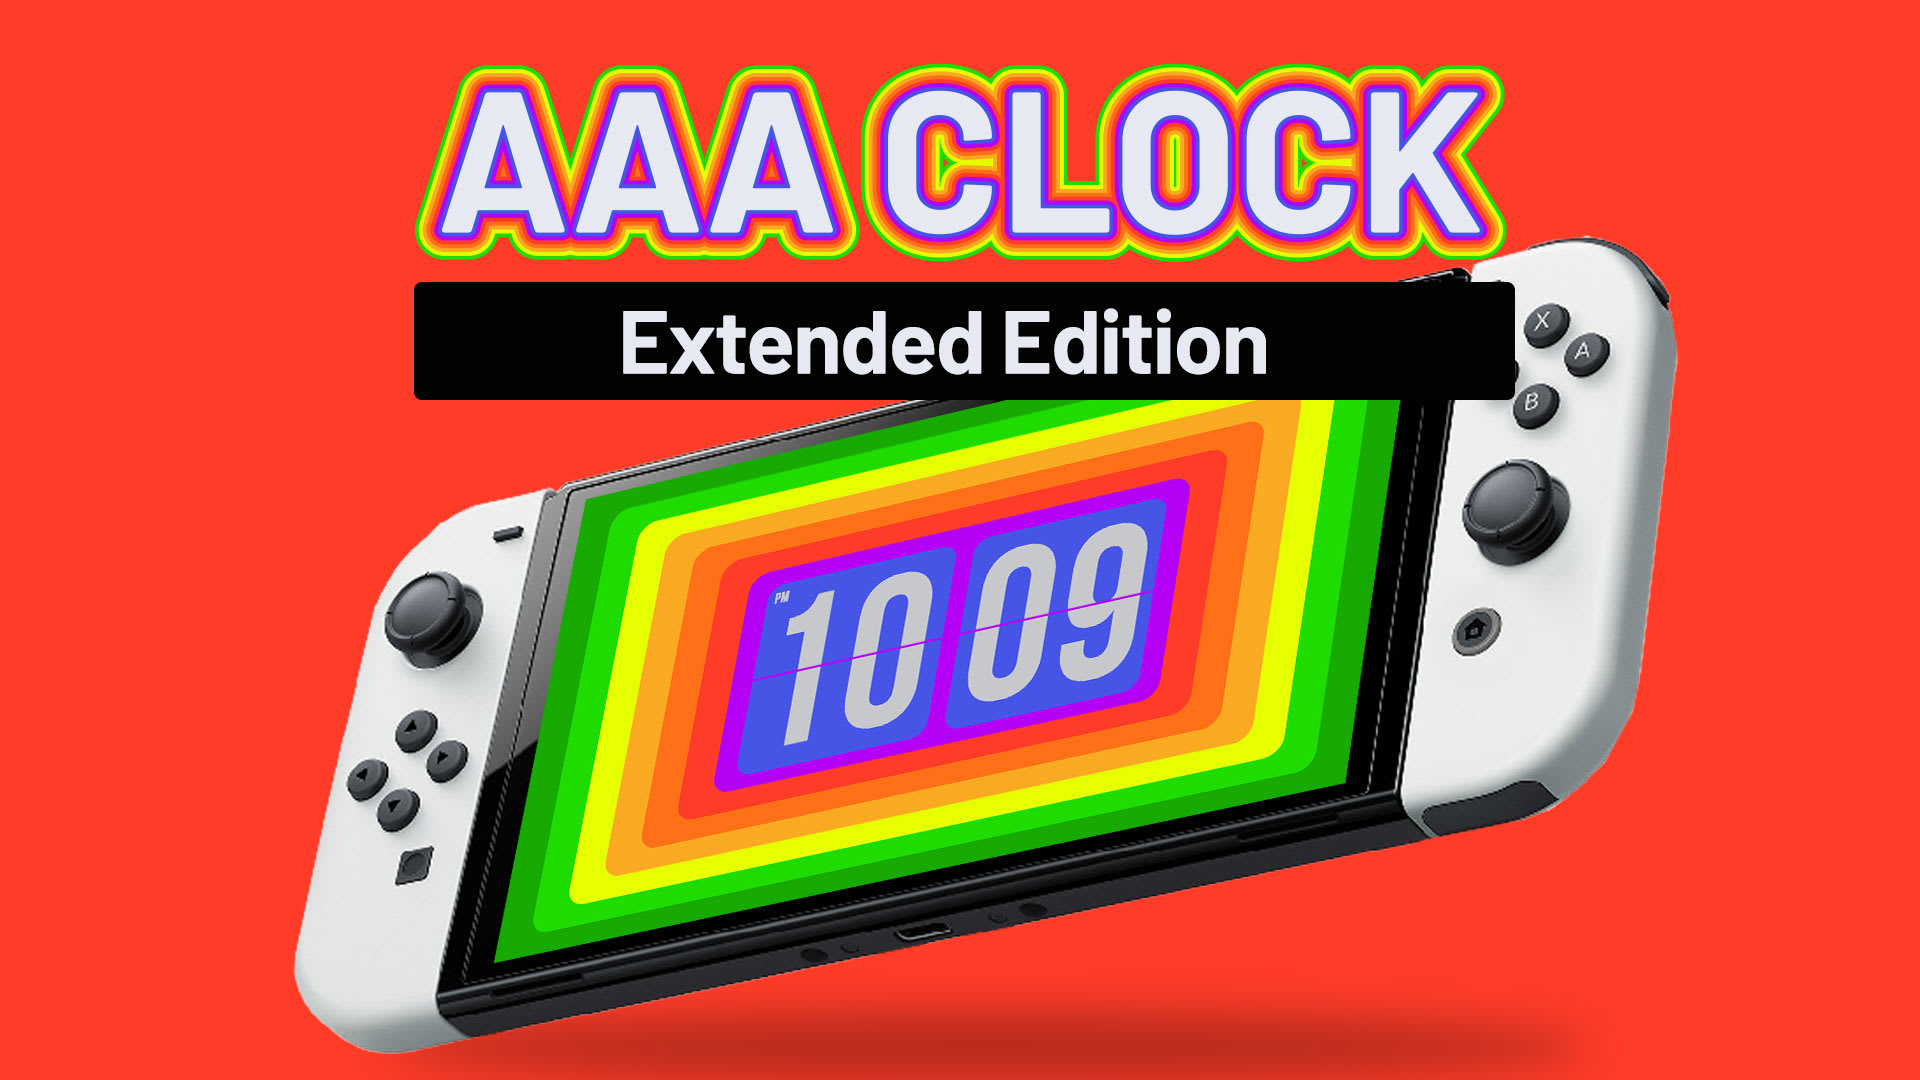 AAA Clock Extended Edition